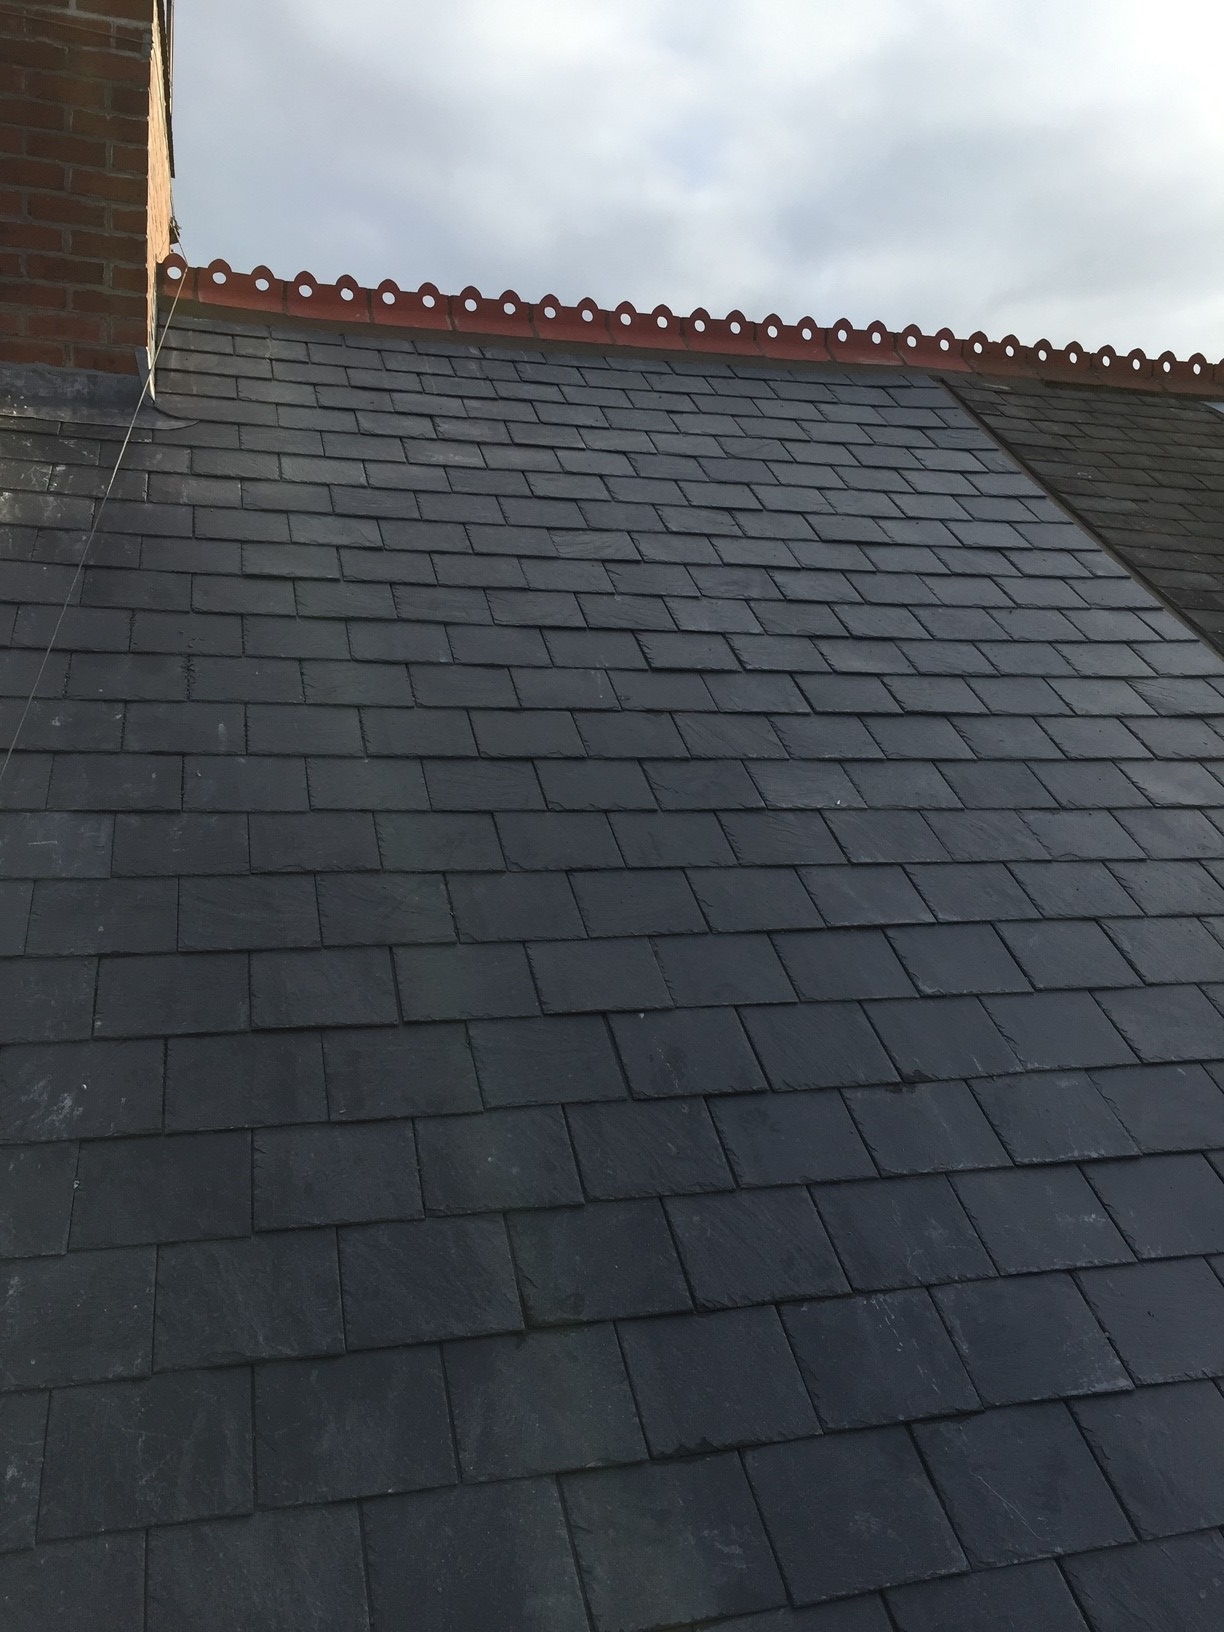 A new tiled roof